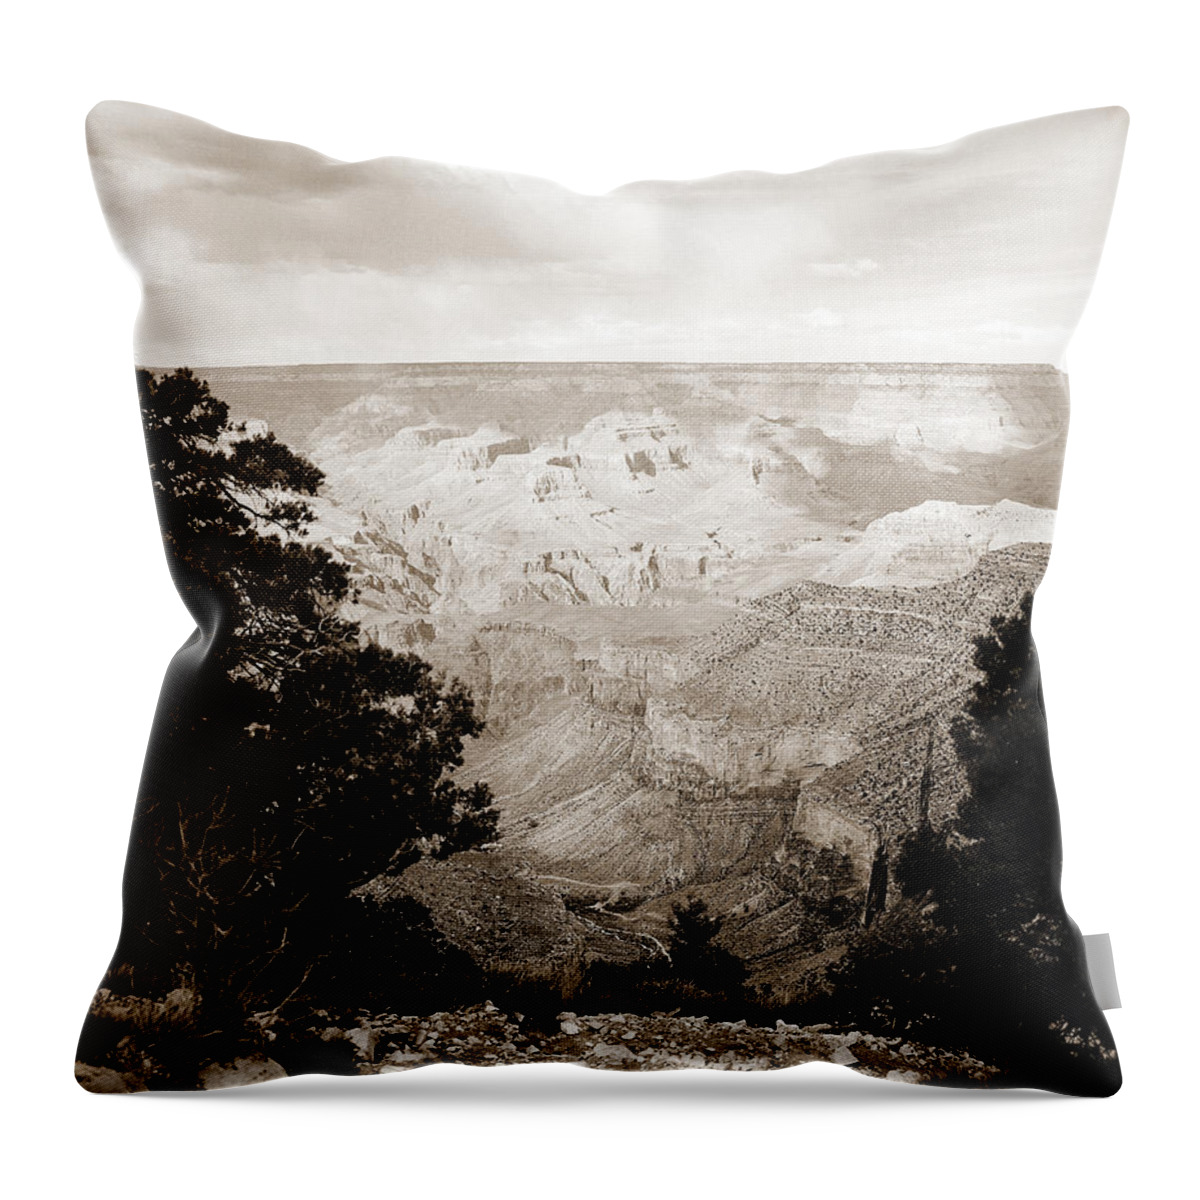 Grand Canyon Throw Pillow featuring the photograph Grand Canyon Arizona Fine Art Photograph In Sepia 3529.01 by M K Miller